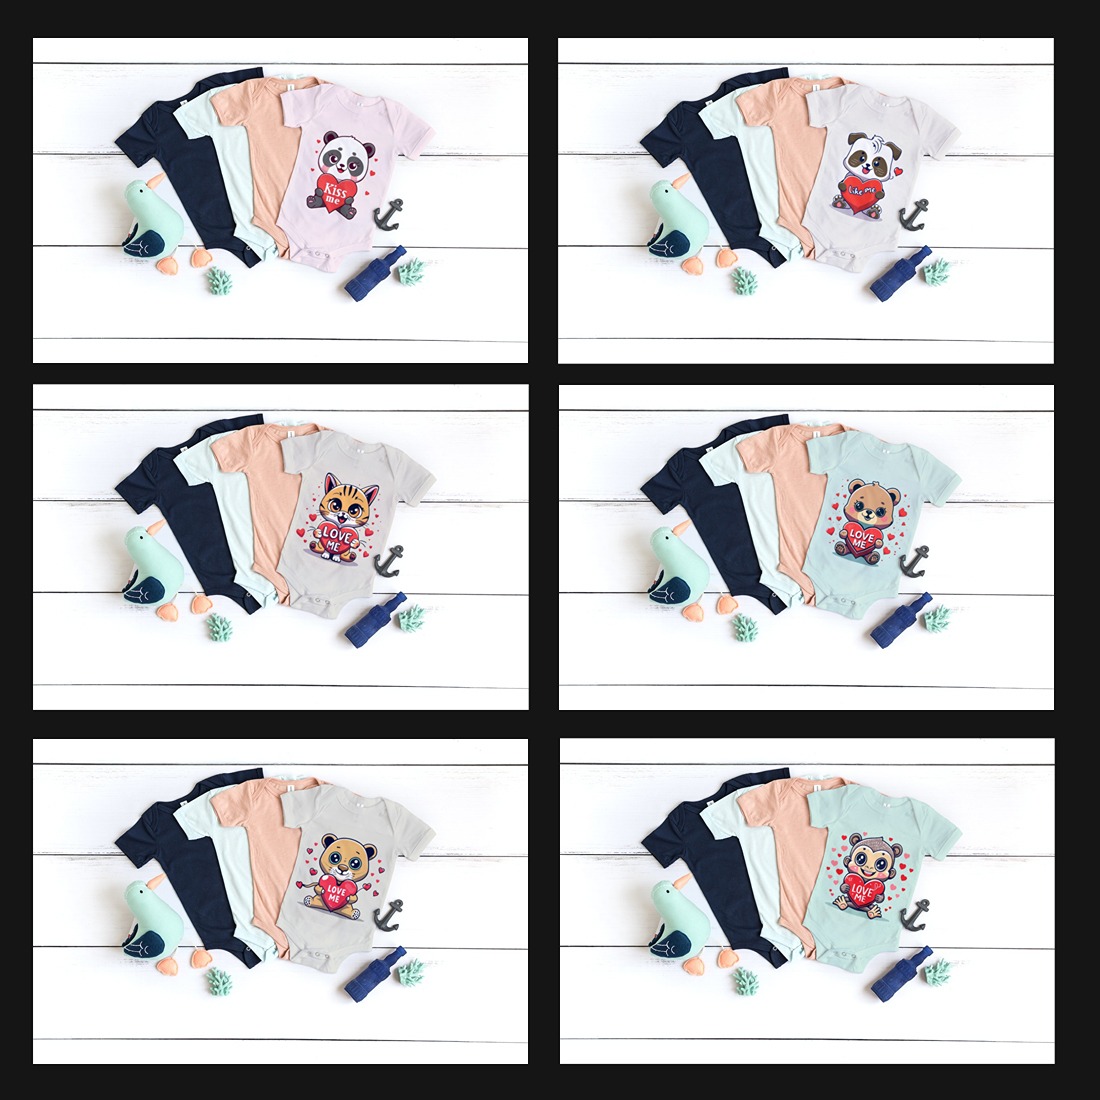 Toddler t-shirts - For Kids Design Template Total = 32 preview image.